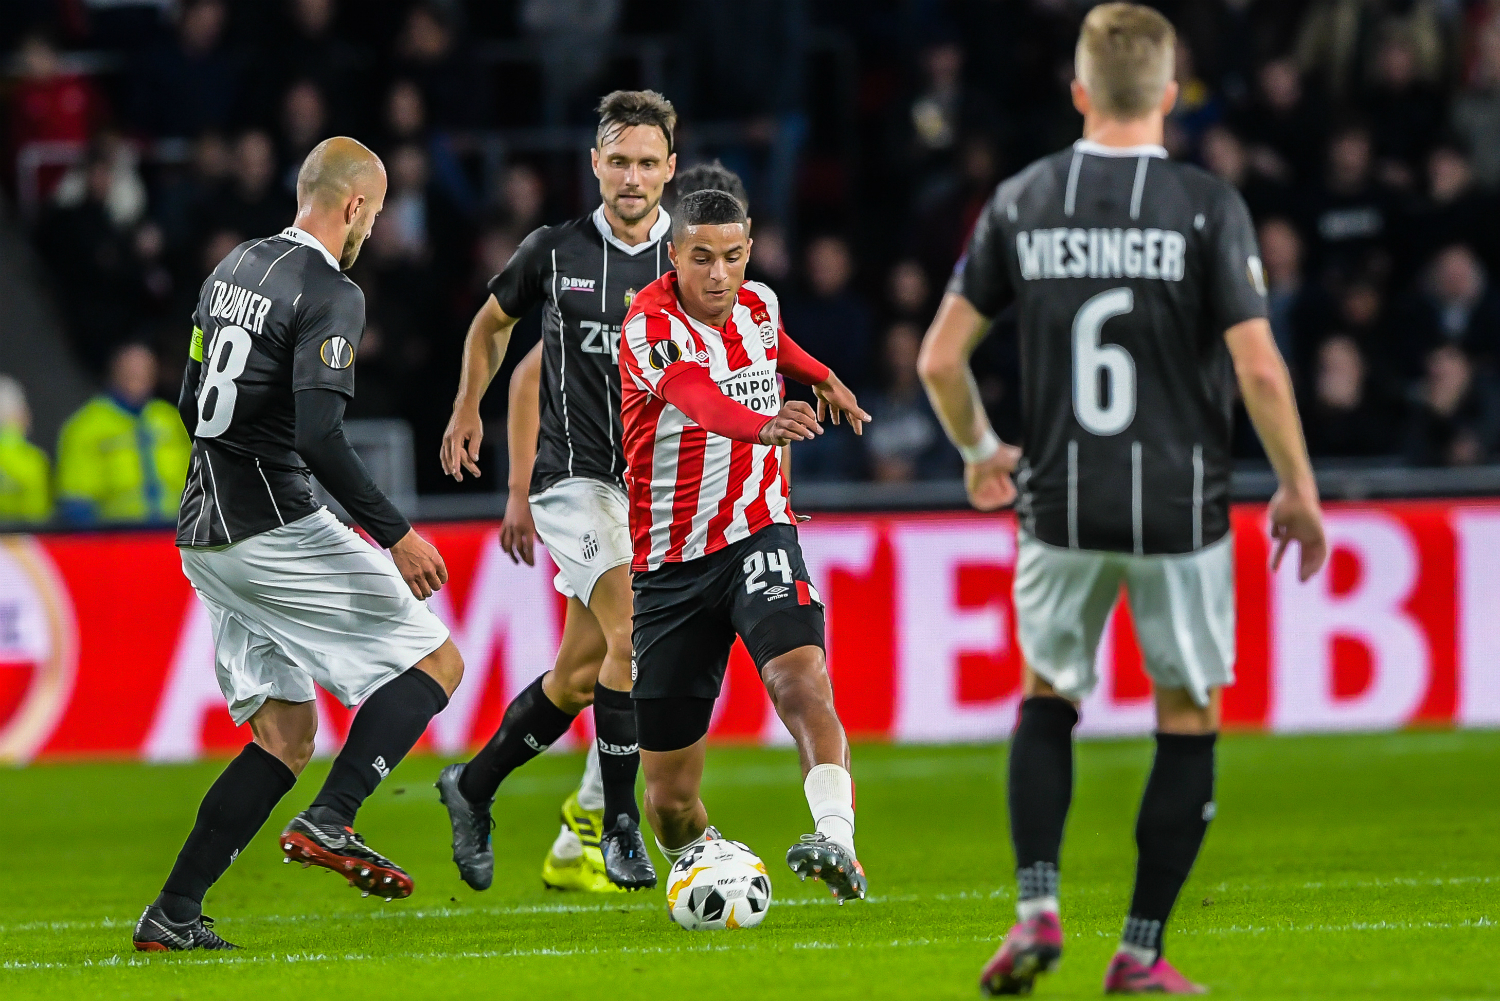 PSV midfielder Mohamed Ihattaren on the ball surrounded by defenders during a match against LASK Linz of Austria.